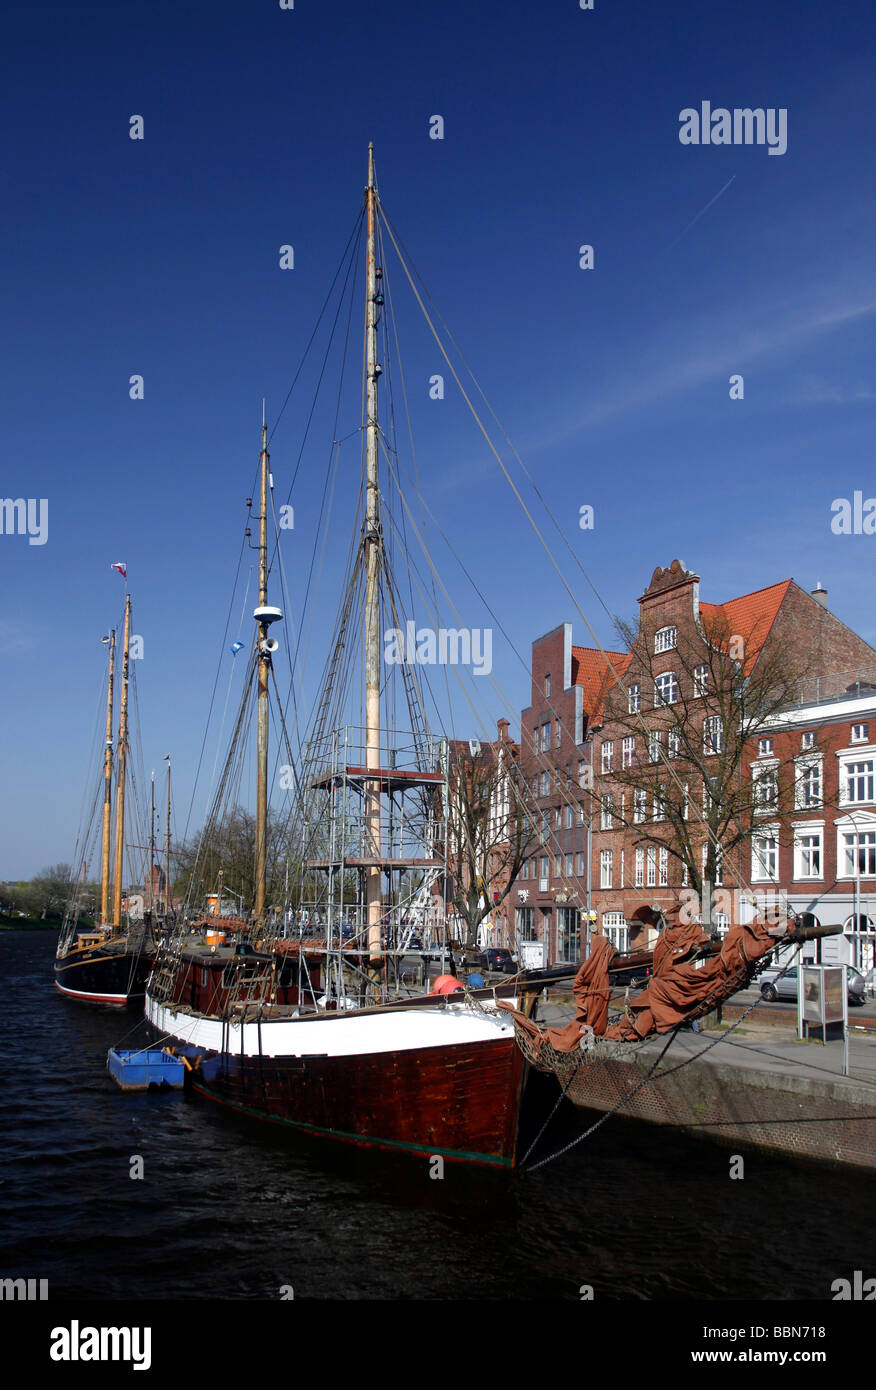 Hanseatic mansions and former warehouses at the Trave river, museum ship, Hanseatic City of Luebeck, Schleswig-Holstein, German Stock Photo